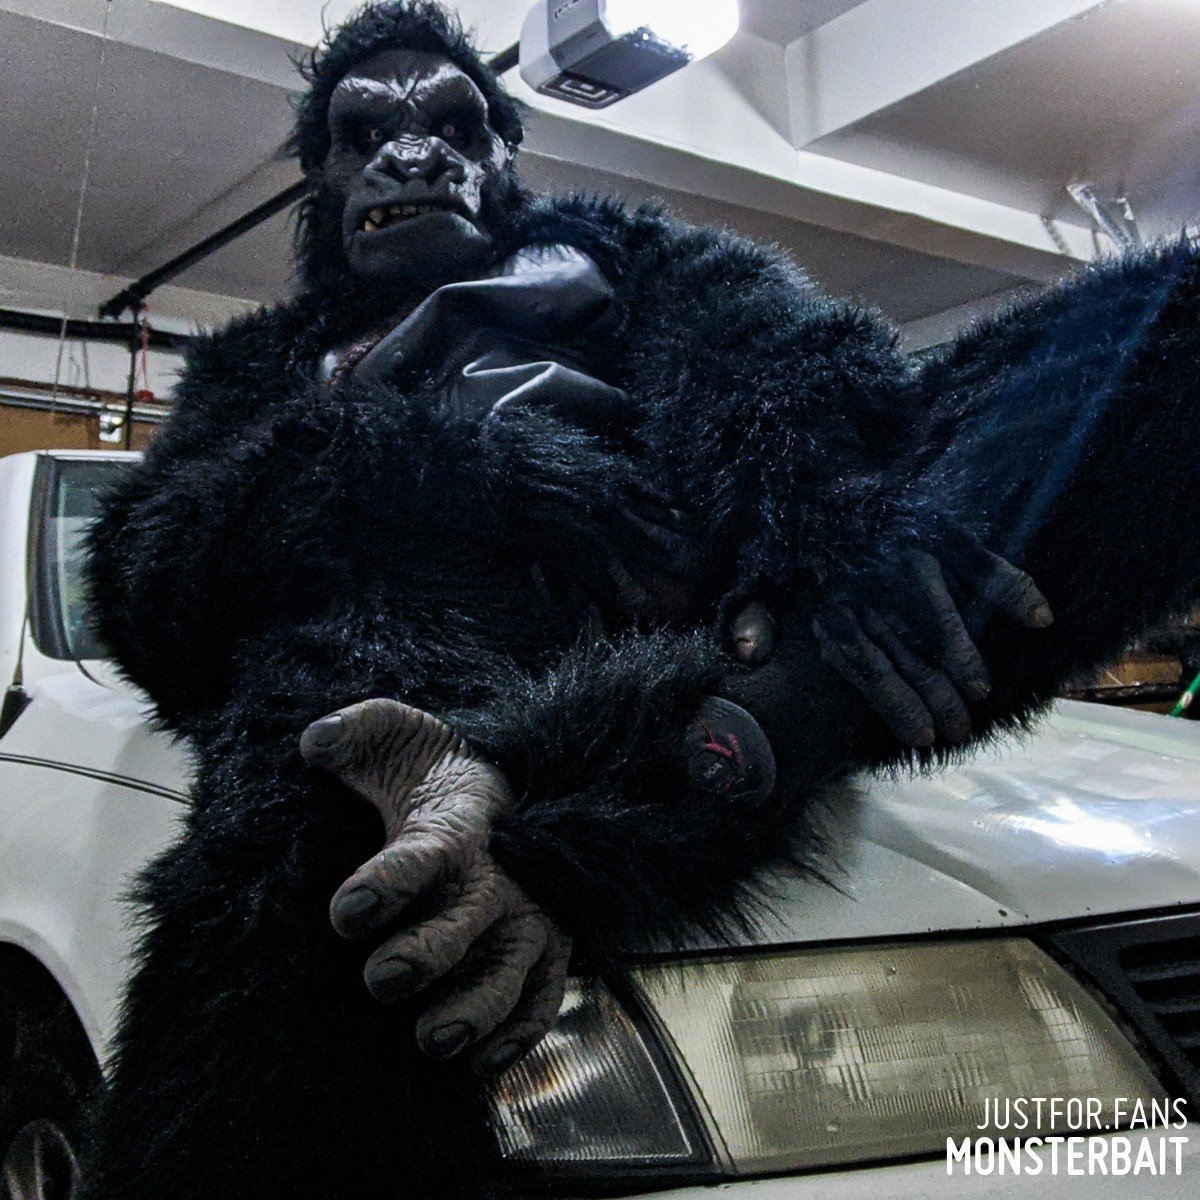 Photo by Monsterbait with the username @Monsterbait, who is a star user,  January 30, 2022 at 5:08 PM. The post is about the topic GayExTumblr and the text says 'Get those gorilla suits filthy you damn dirty apes!
It's a national holiday tomorrow!🦍🍌💦

#NationalGorillaSuitDay #fetish #Mask #SeductiveSunday #Monstersex #eroticart #monster #ape #gorilla #costume #cosplay #erotica #men #man #gay #photo #furry..'